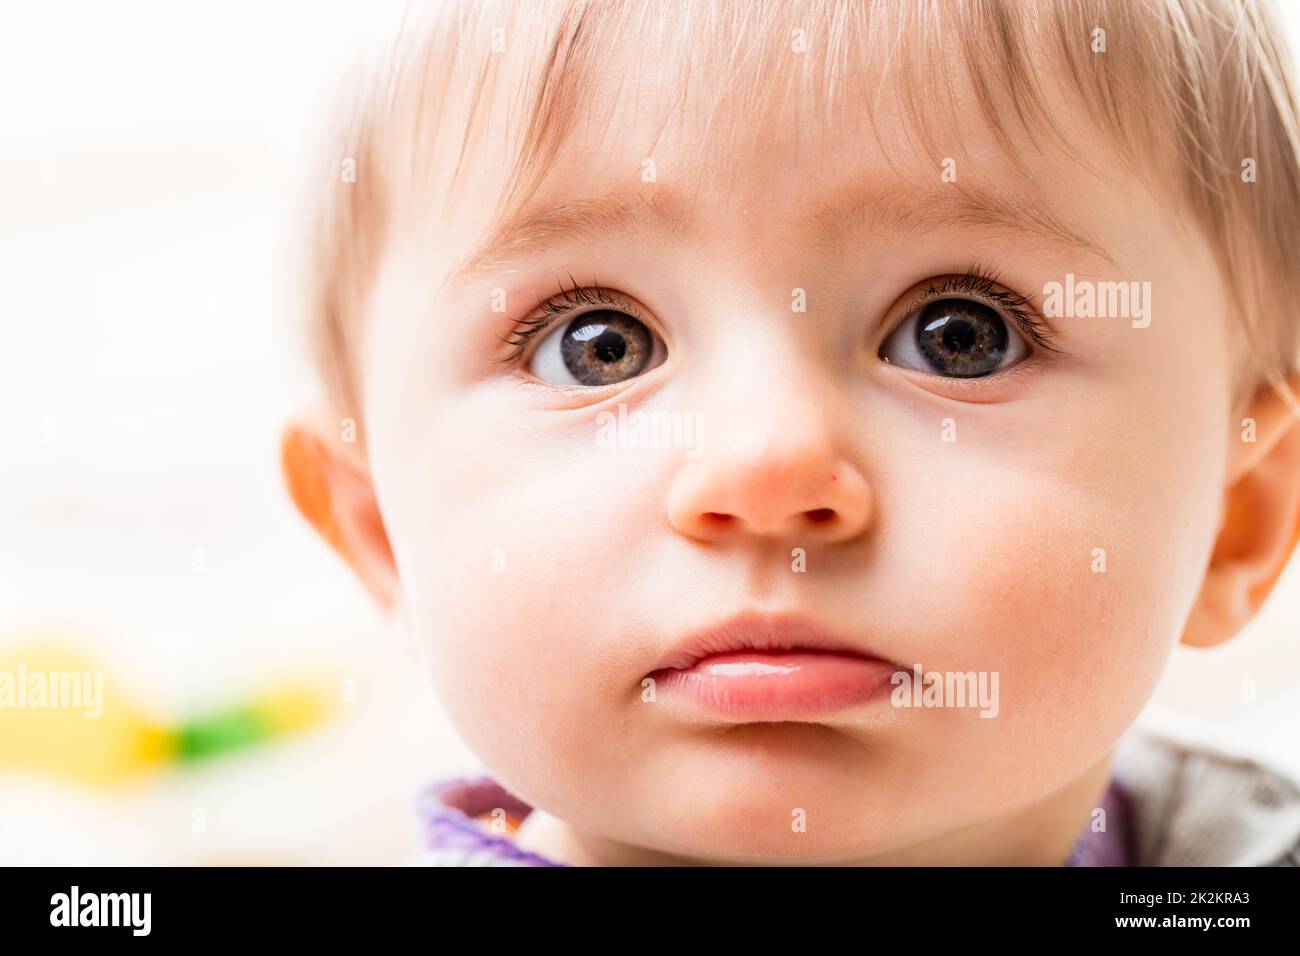 close up of children face with big eyes Stock Photo